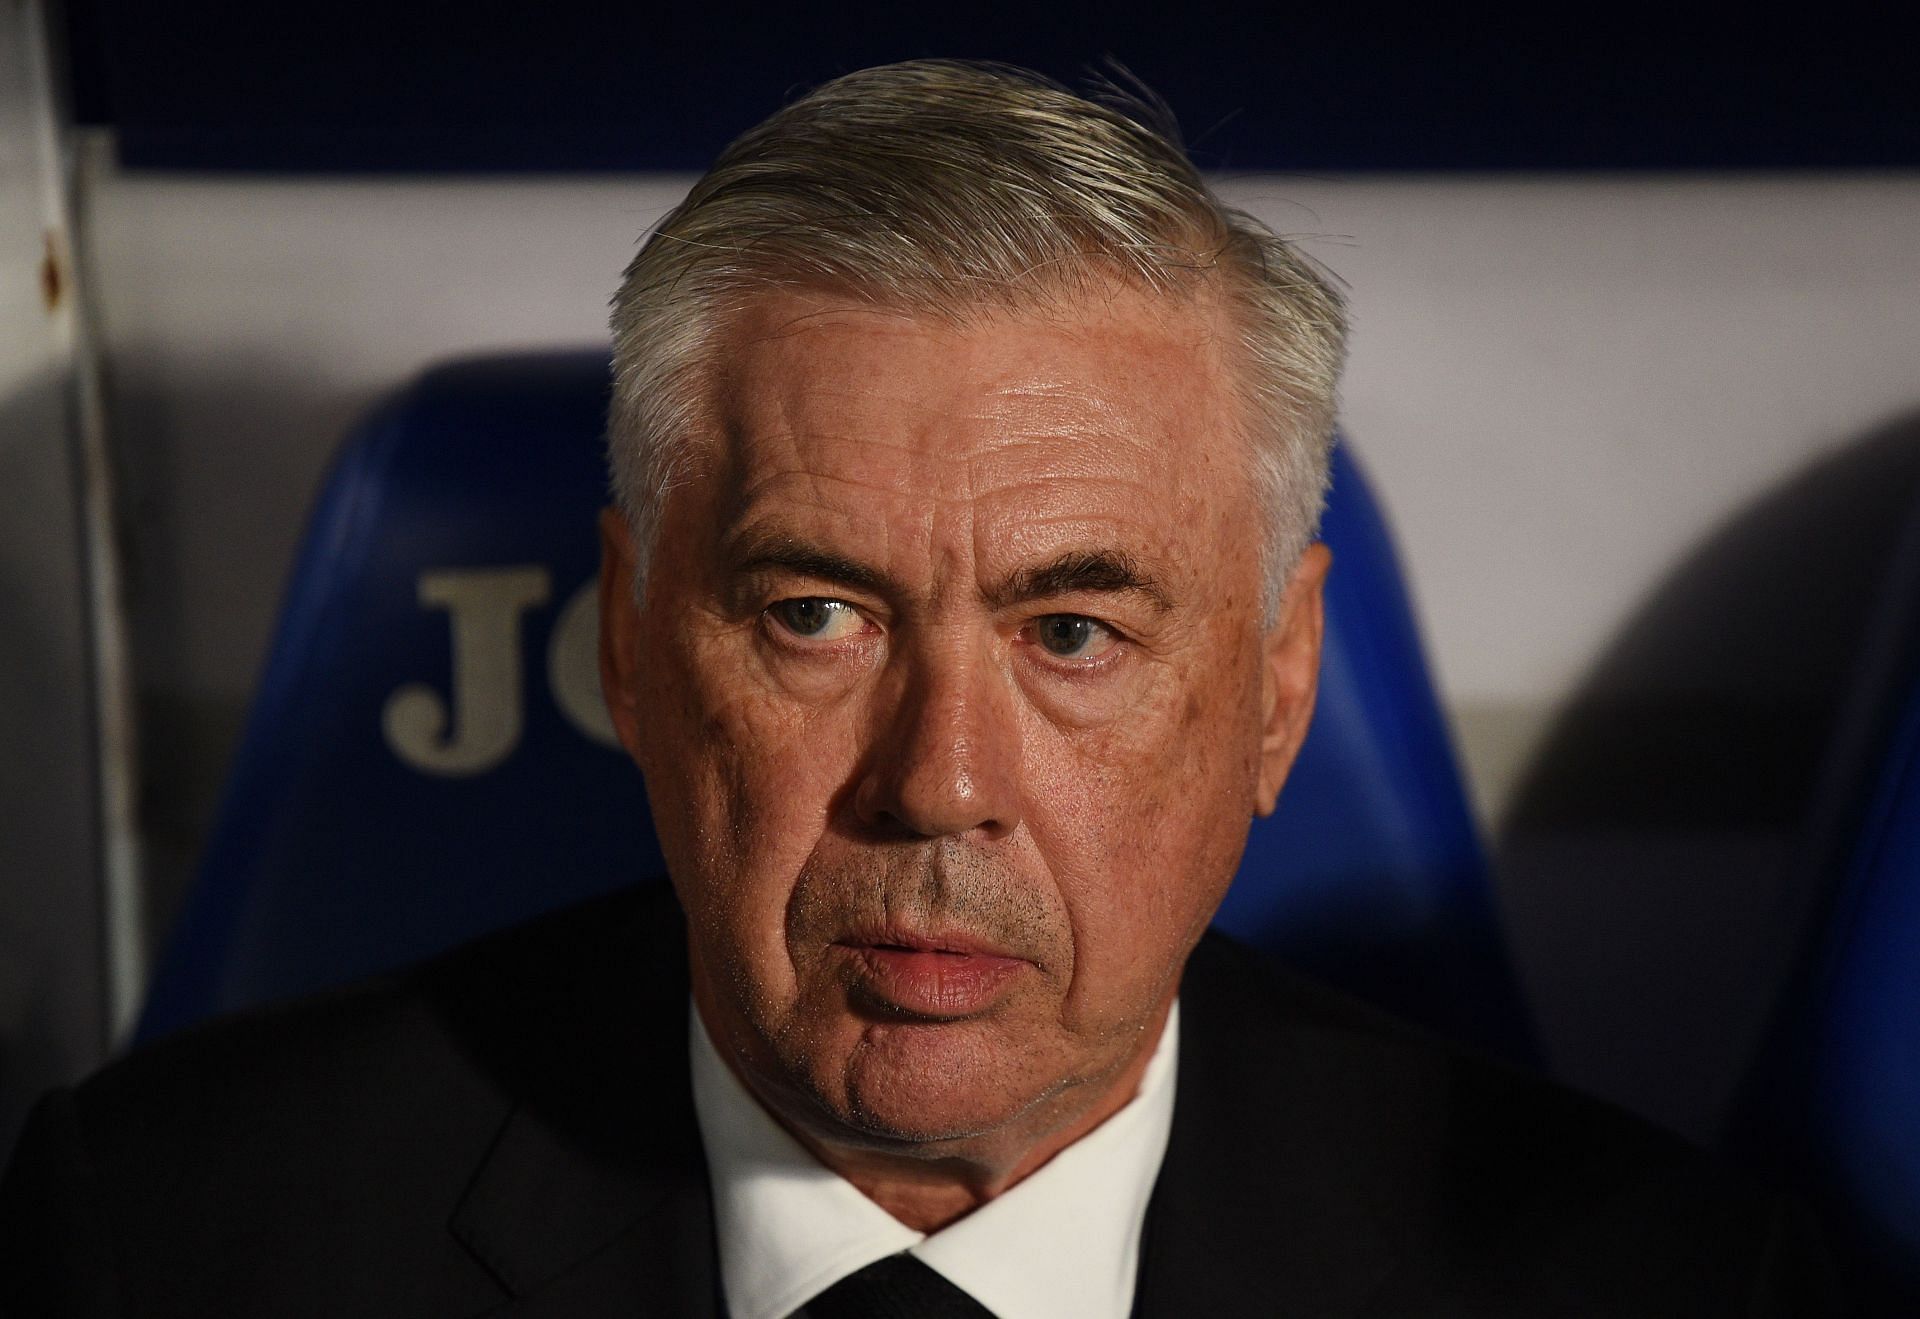 Carlo Ancelotti could extend his stay at Real Madrid.